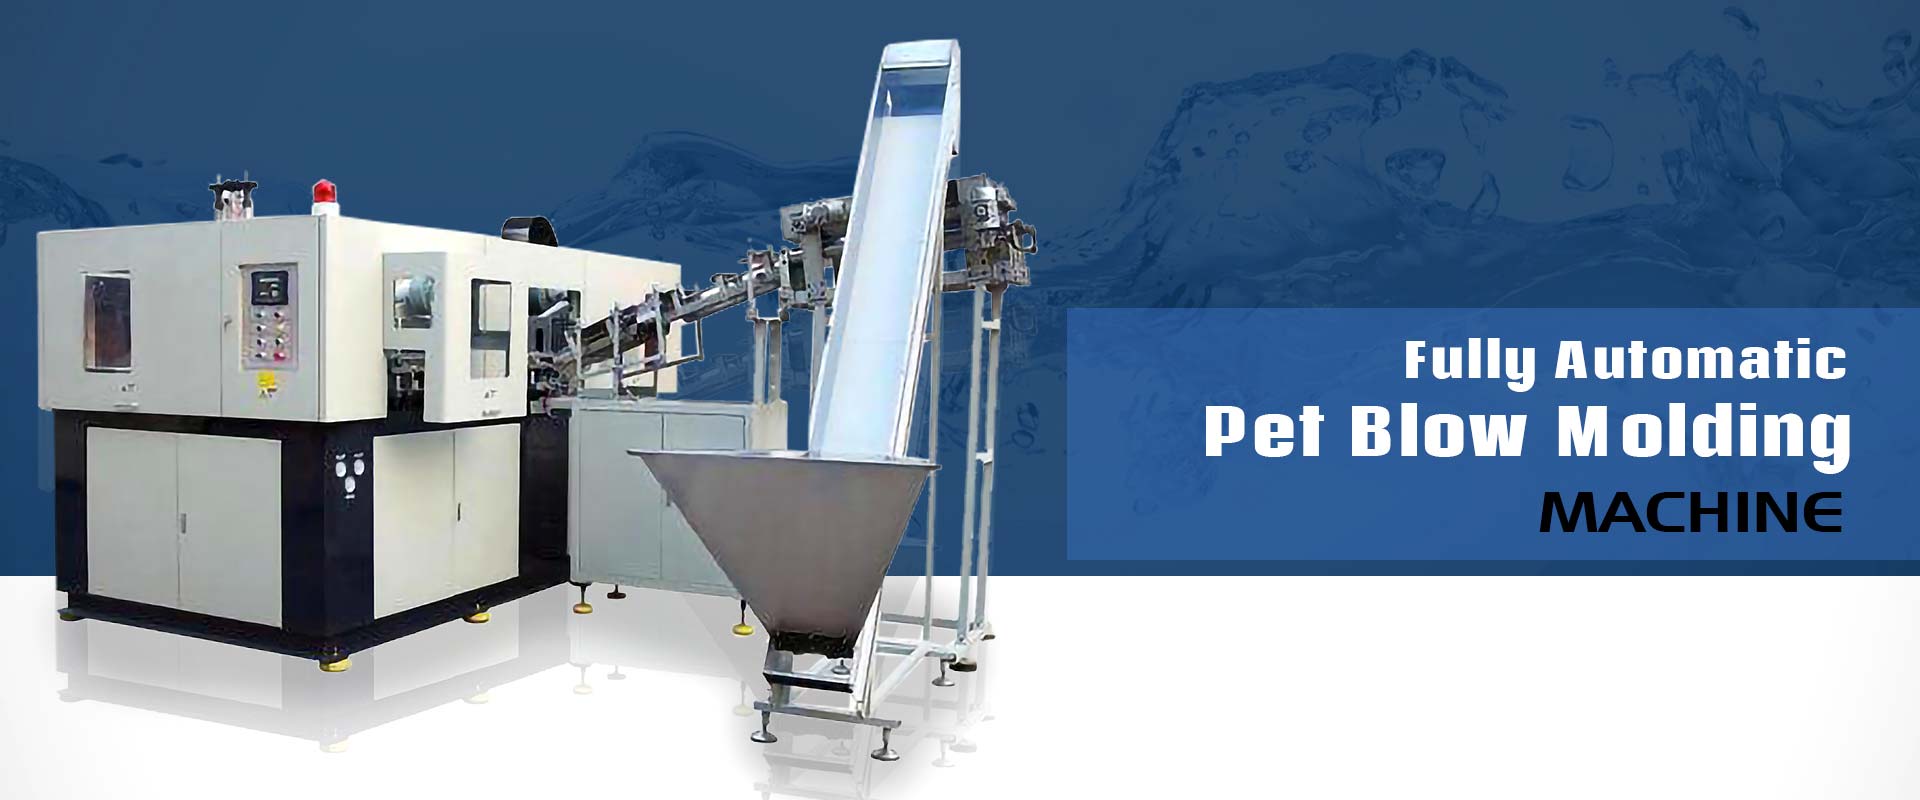 Fully Automatic Pet Blow Molding Machine In Lethbridge